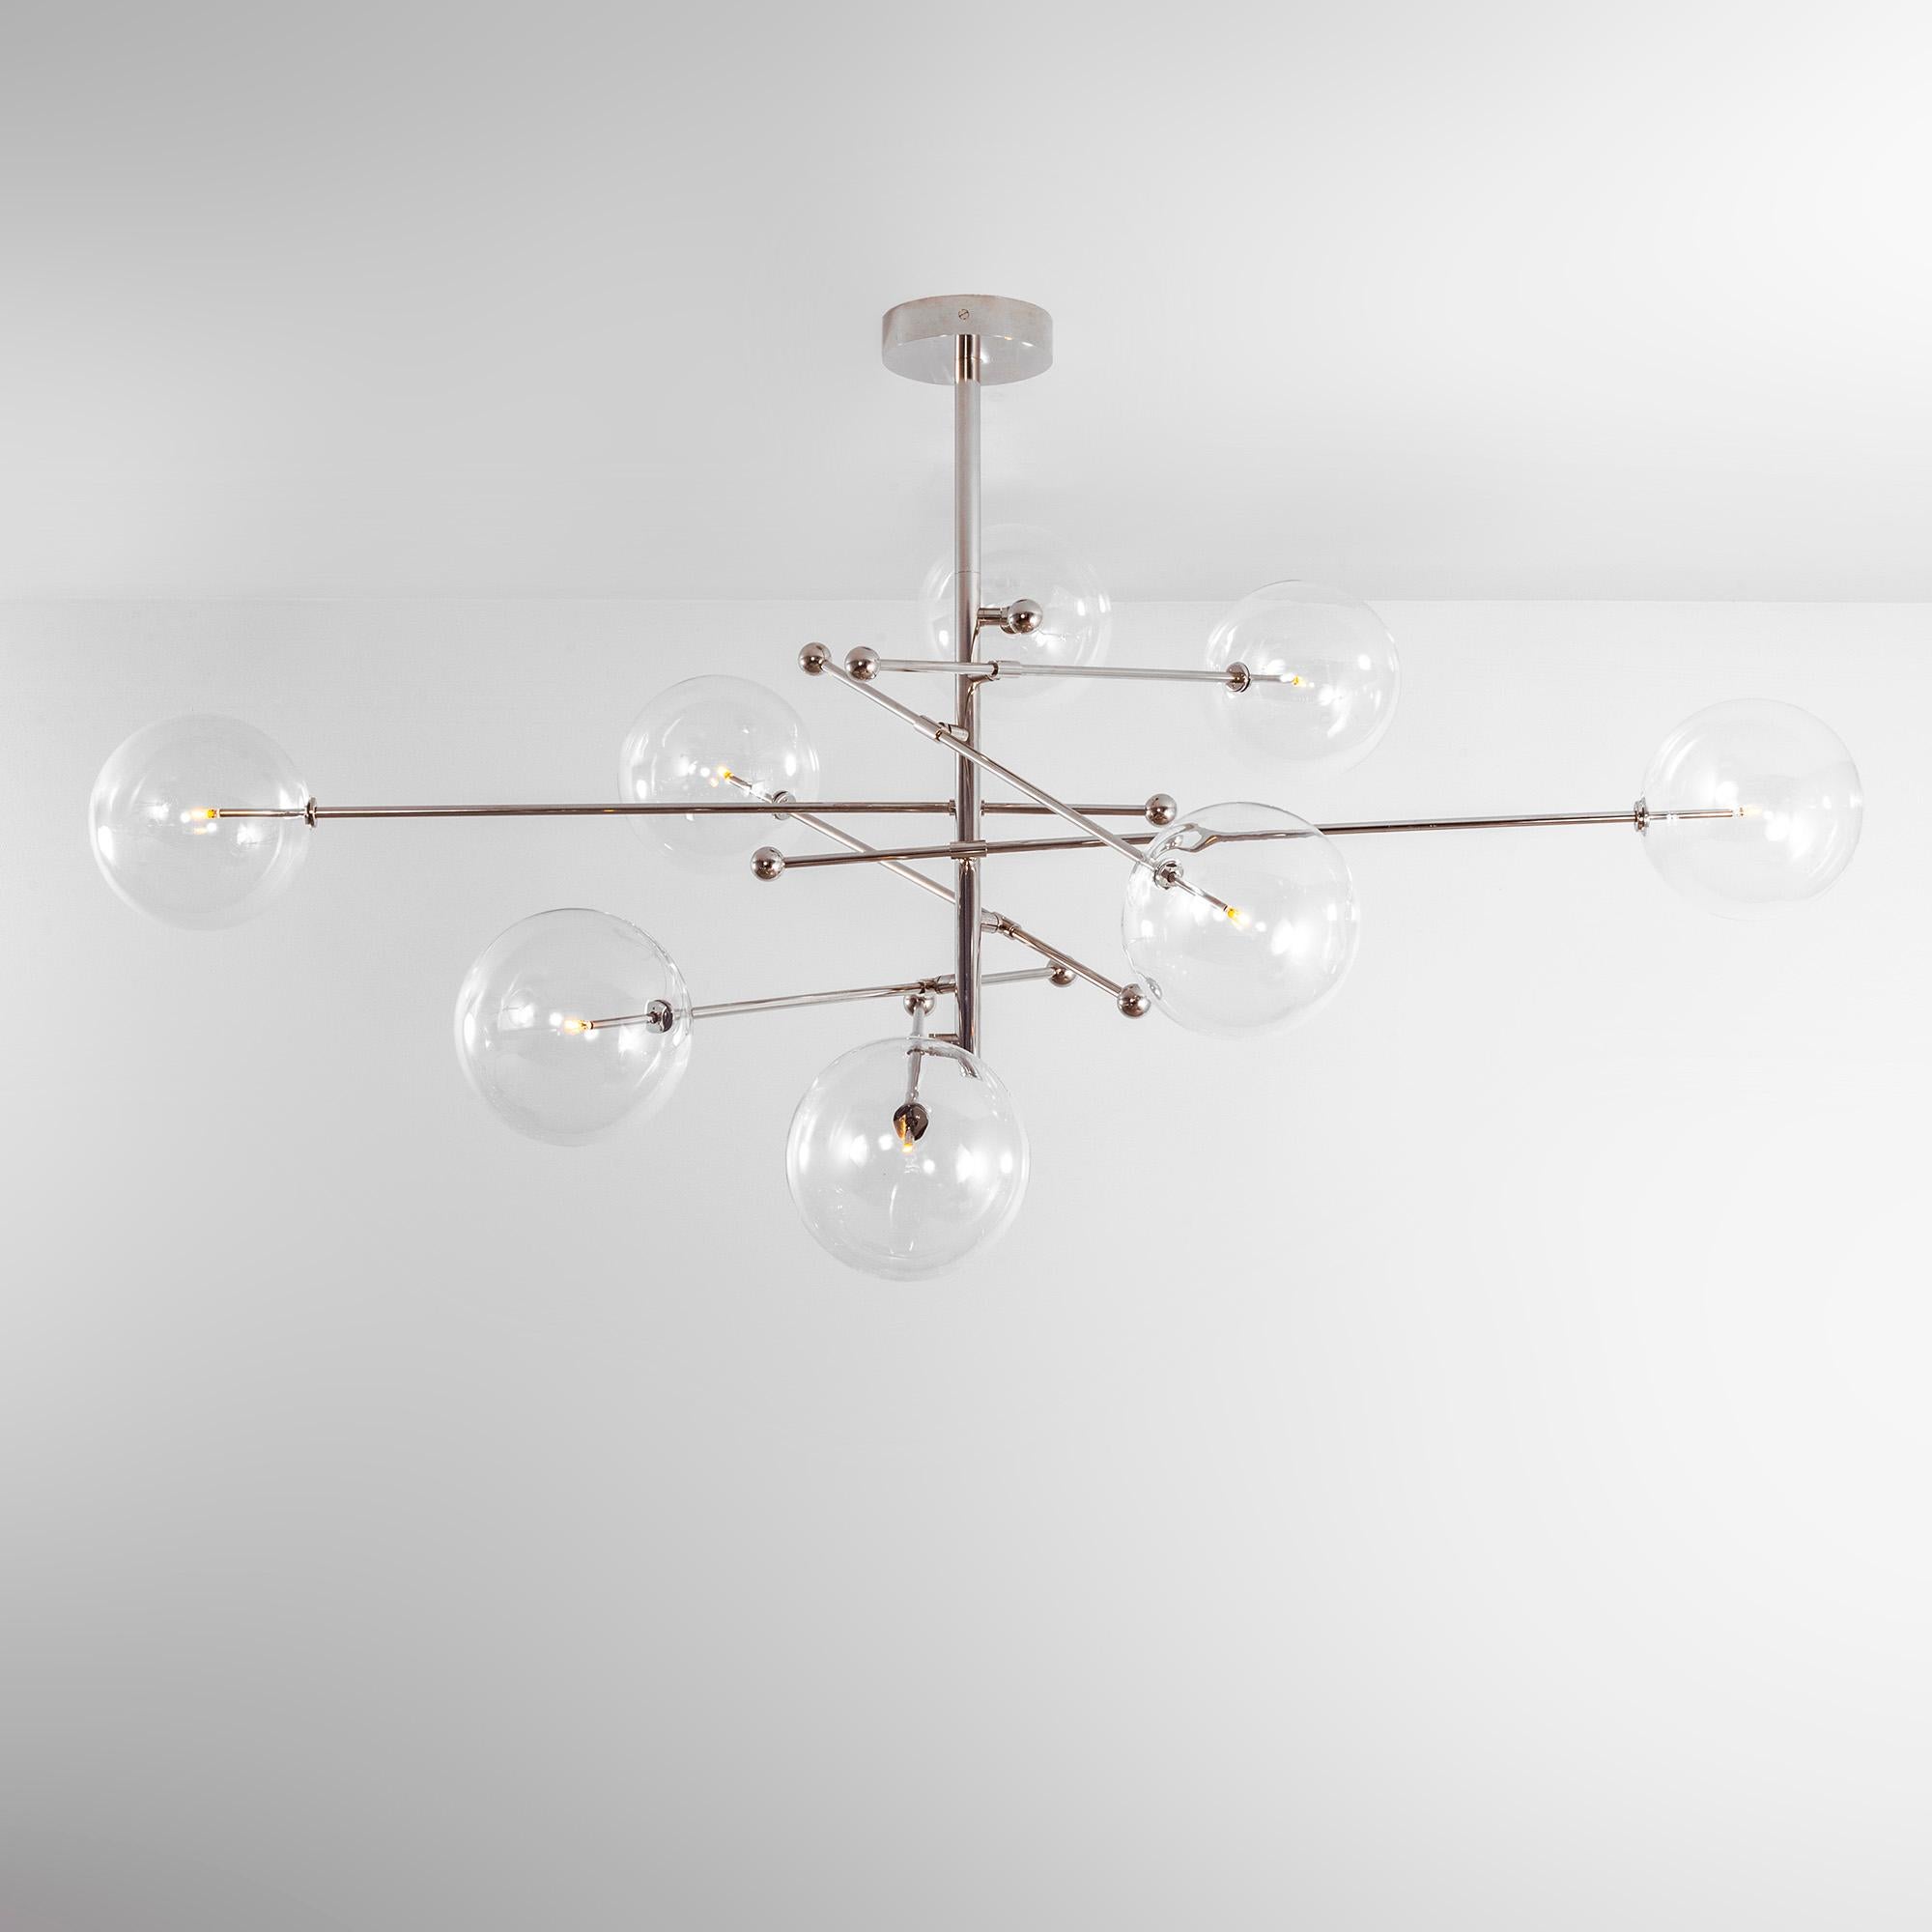 RD15 12 Arms Polished Nickel Chandelier by Schwung
Dimensions: W 140 x D 140 x H 89.1 cm
Materials: Solid Brass. Hand Blown Glass Globes
Finishes: Polished Nickel. Available also in Black Gunmetal, and Lacquered Burnished Brass. 
All our lamps can